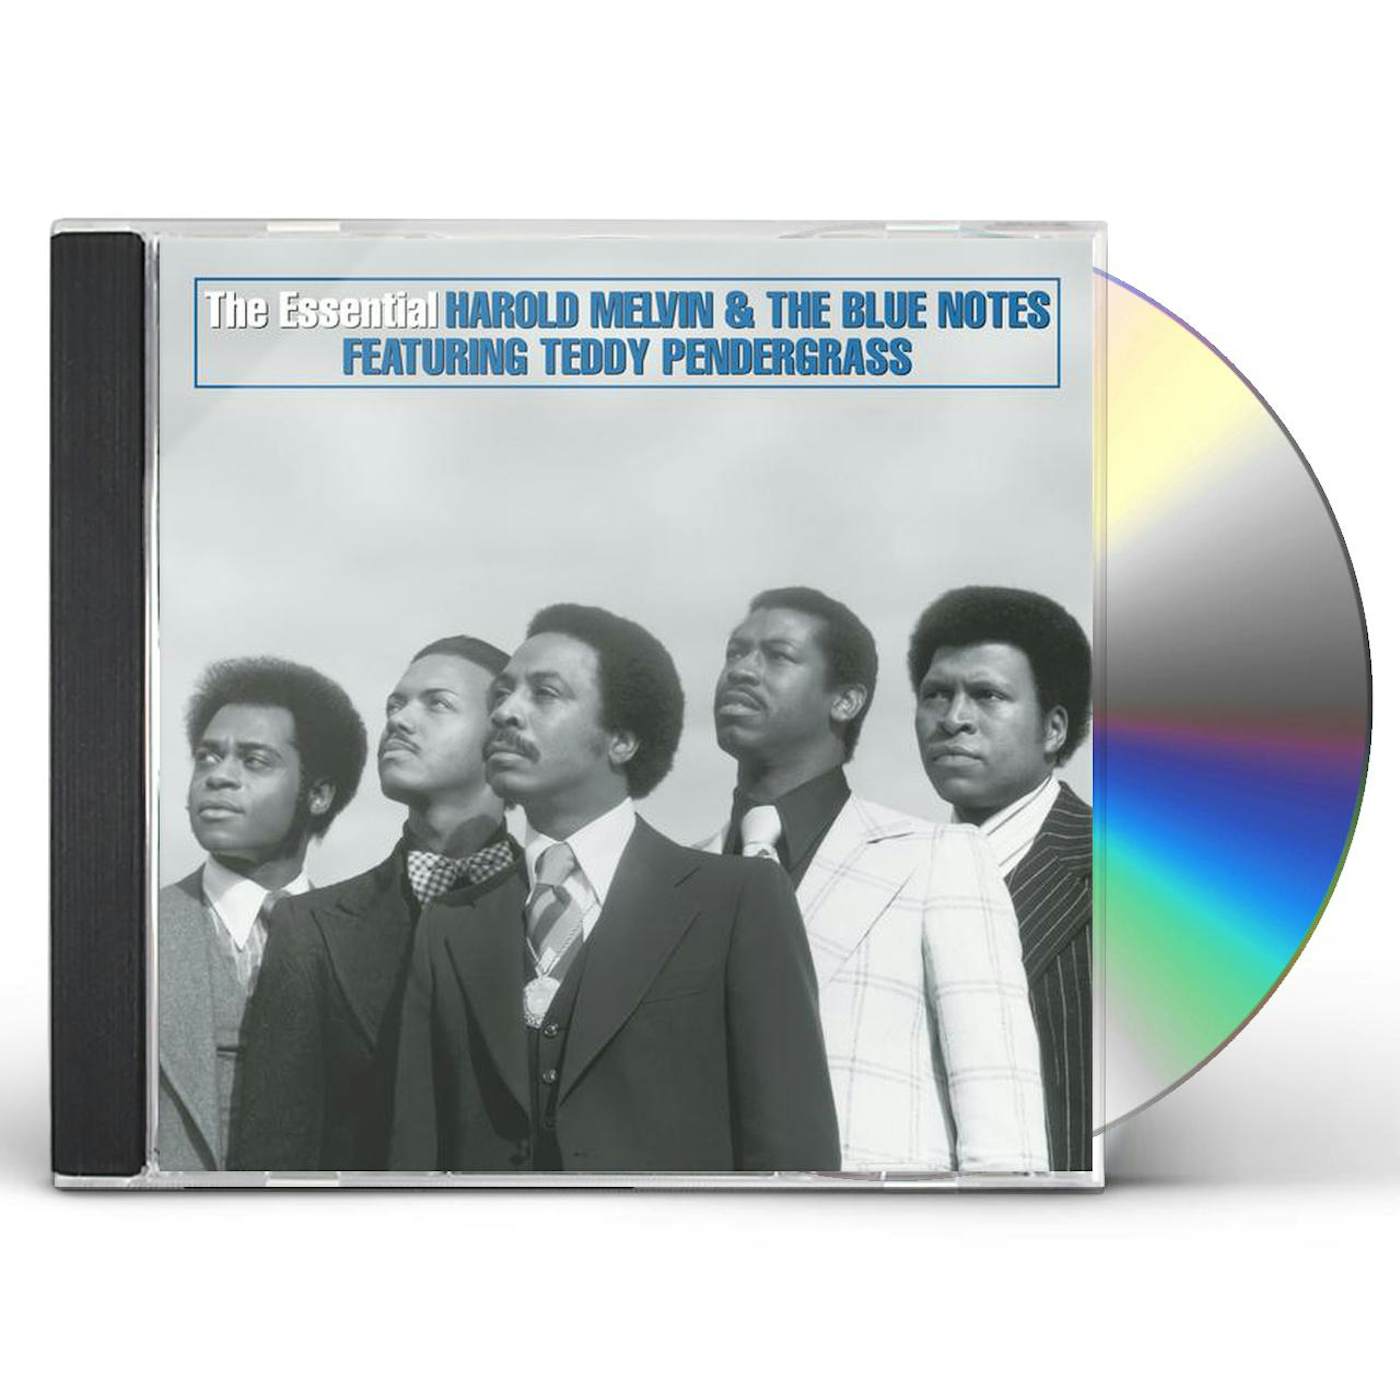 Harold Melvin & The Blue Notes ESSENTIAL (FEAT TEDDY PENDERGRASS) CD